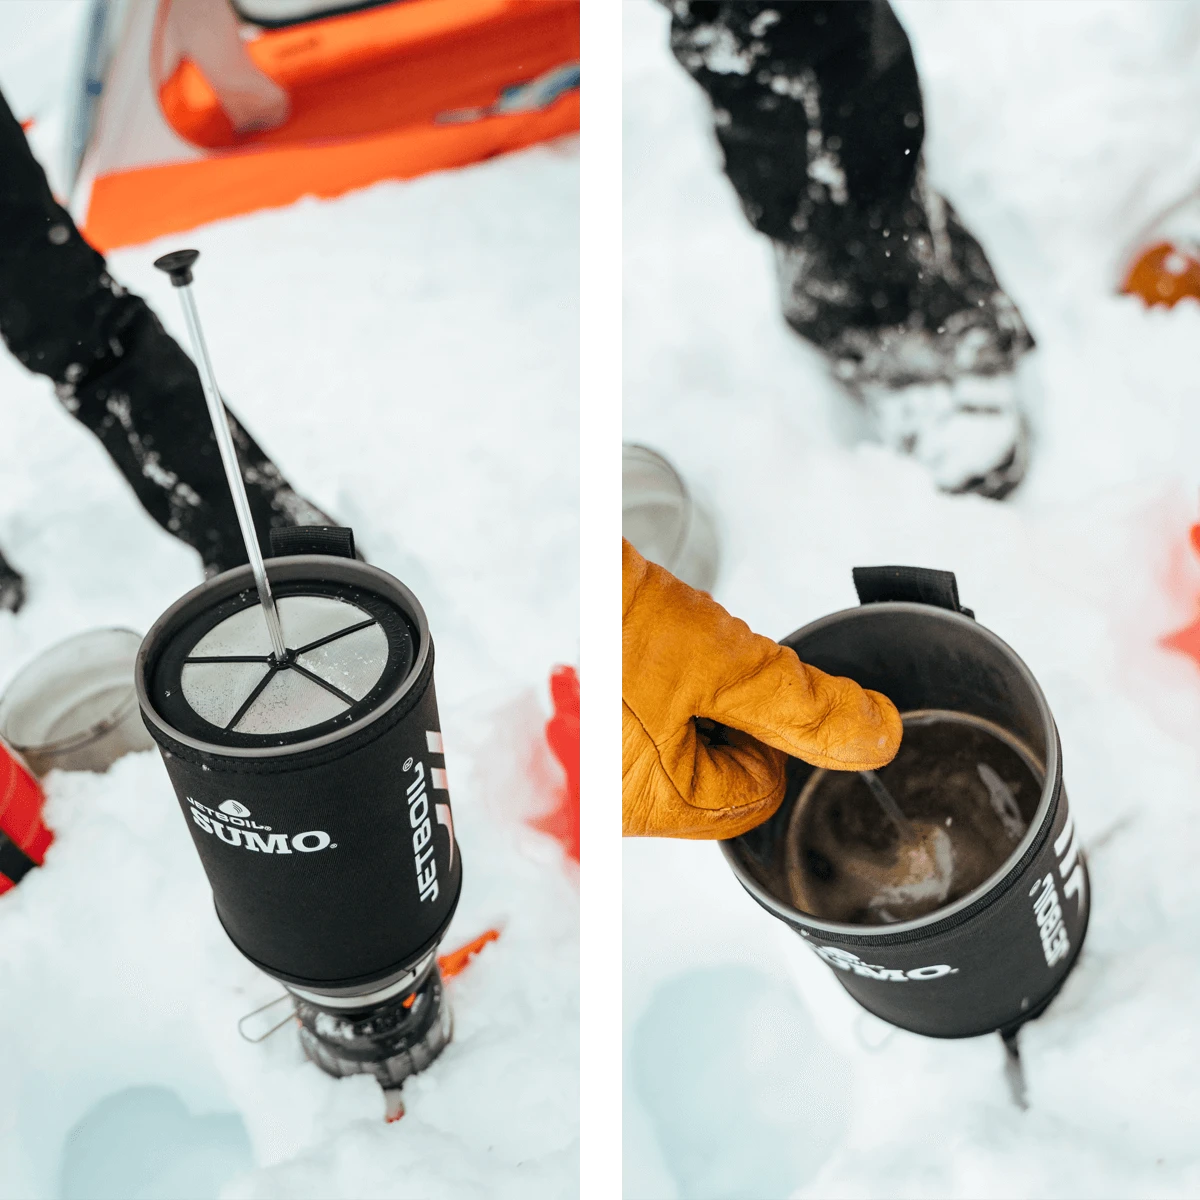 Making some coffee in the snow with the Sumo Cooking System using the Jetboil coffee press